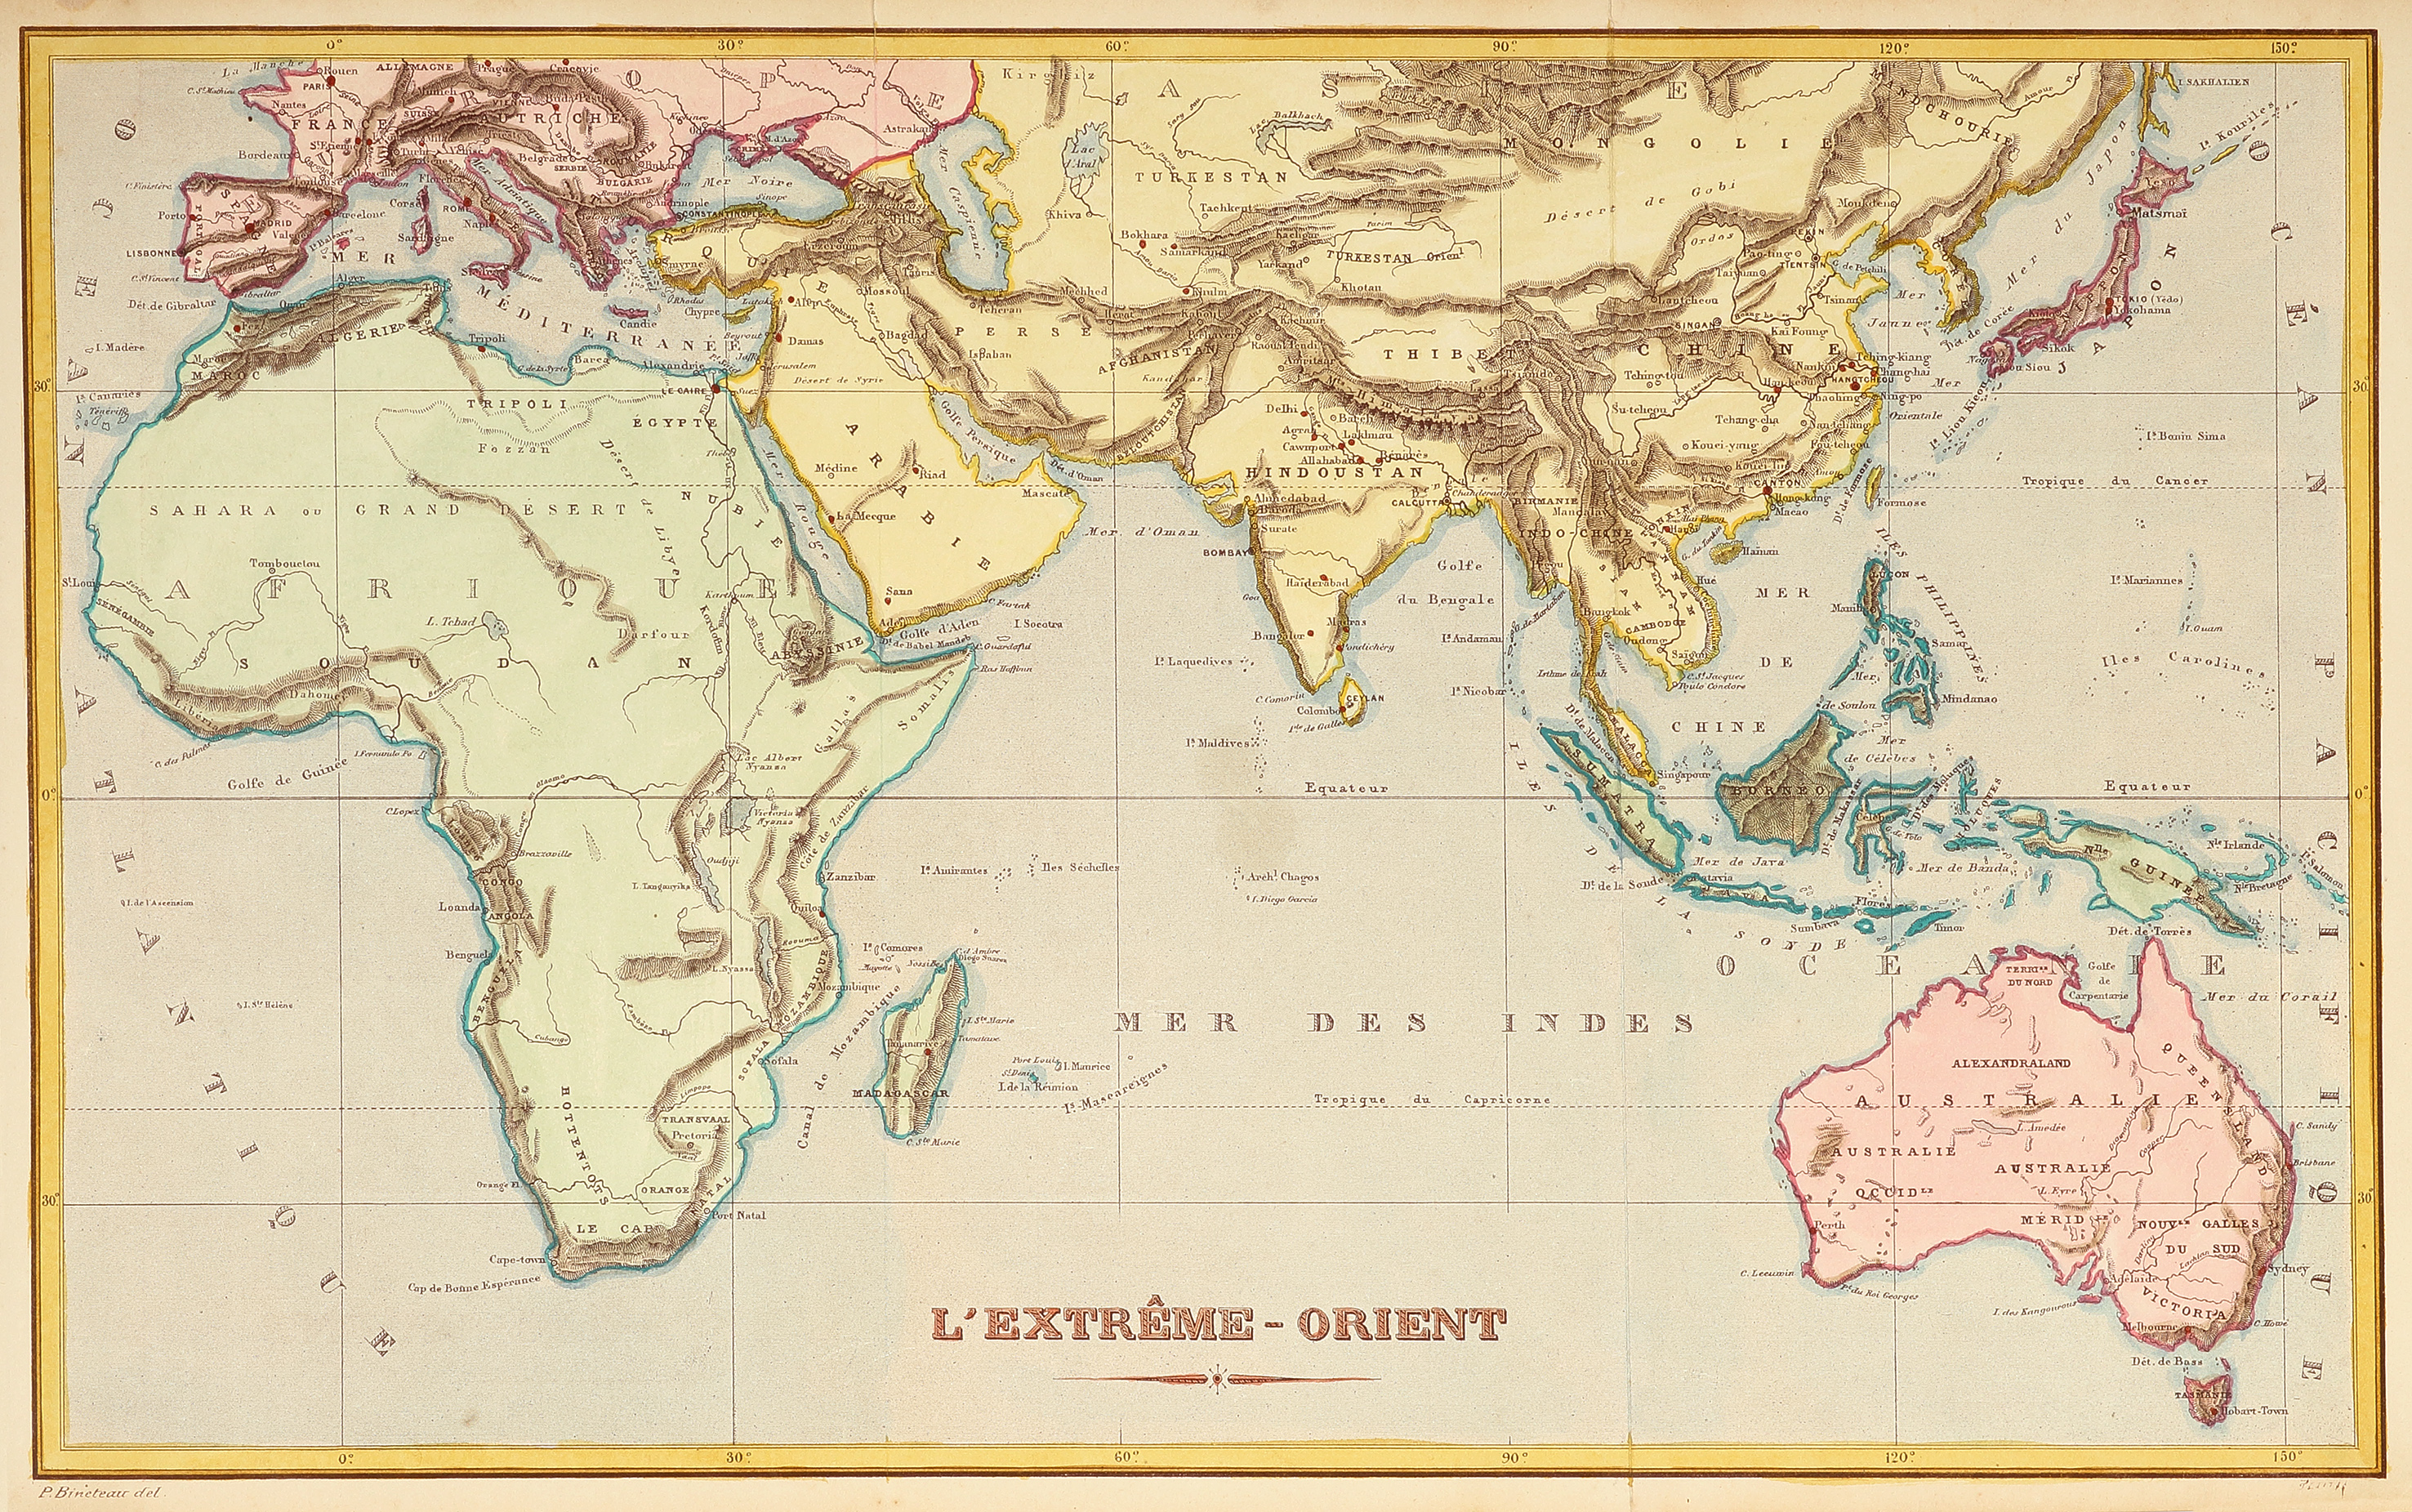 L'Extreme-Orient. - Antique Print from 1889